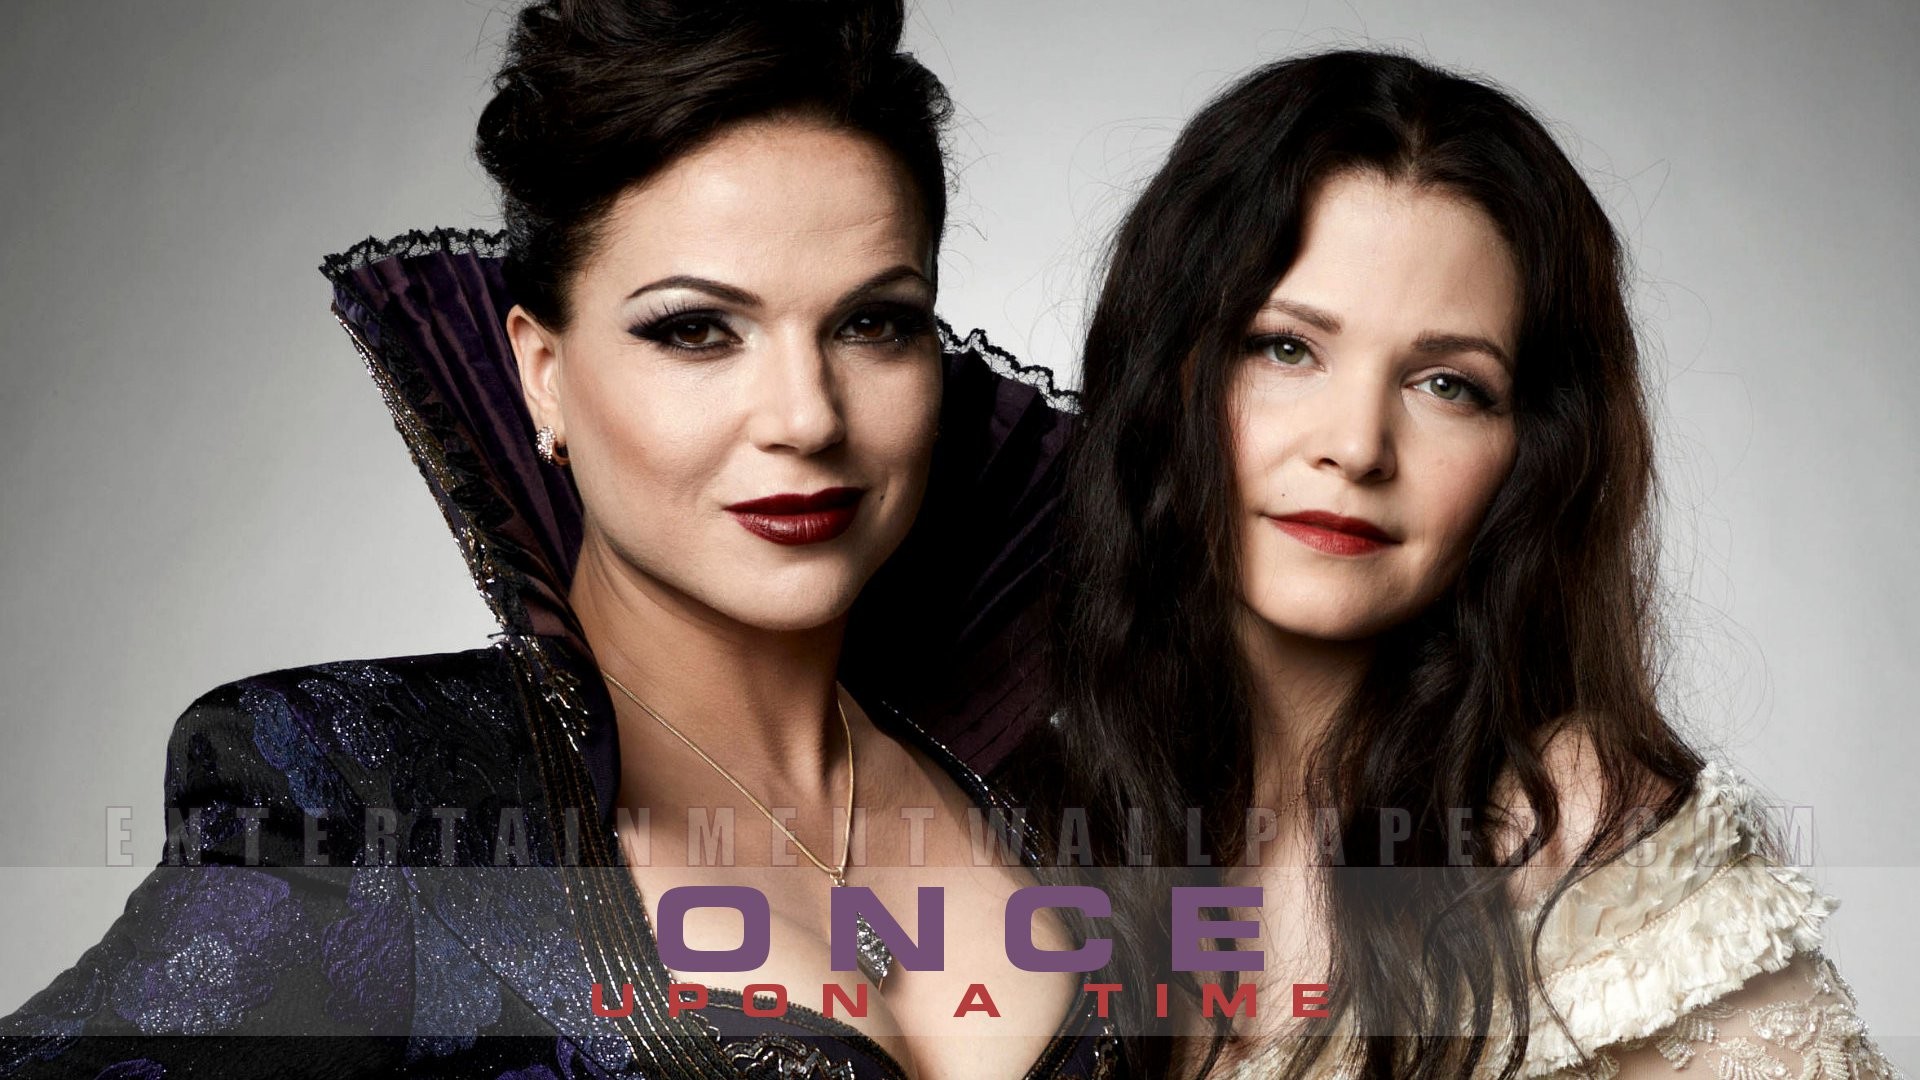 Once Upon a Time Wallpaper – Original size, download now.